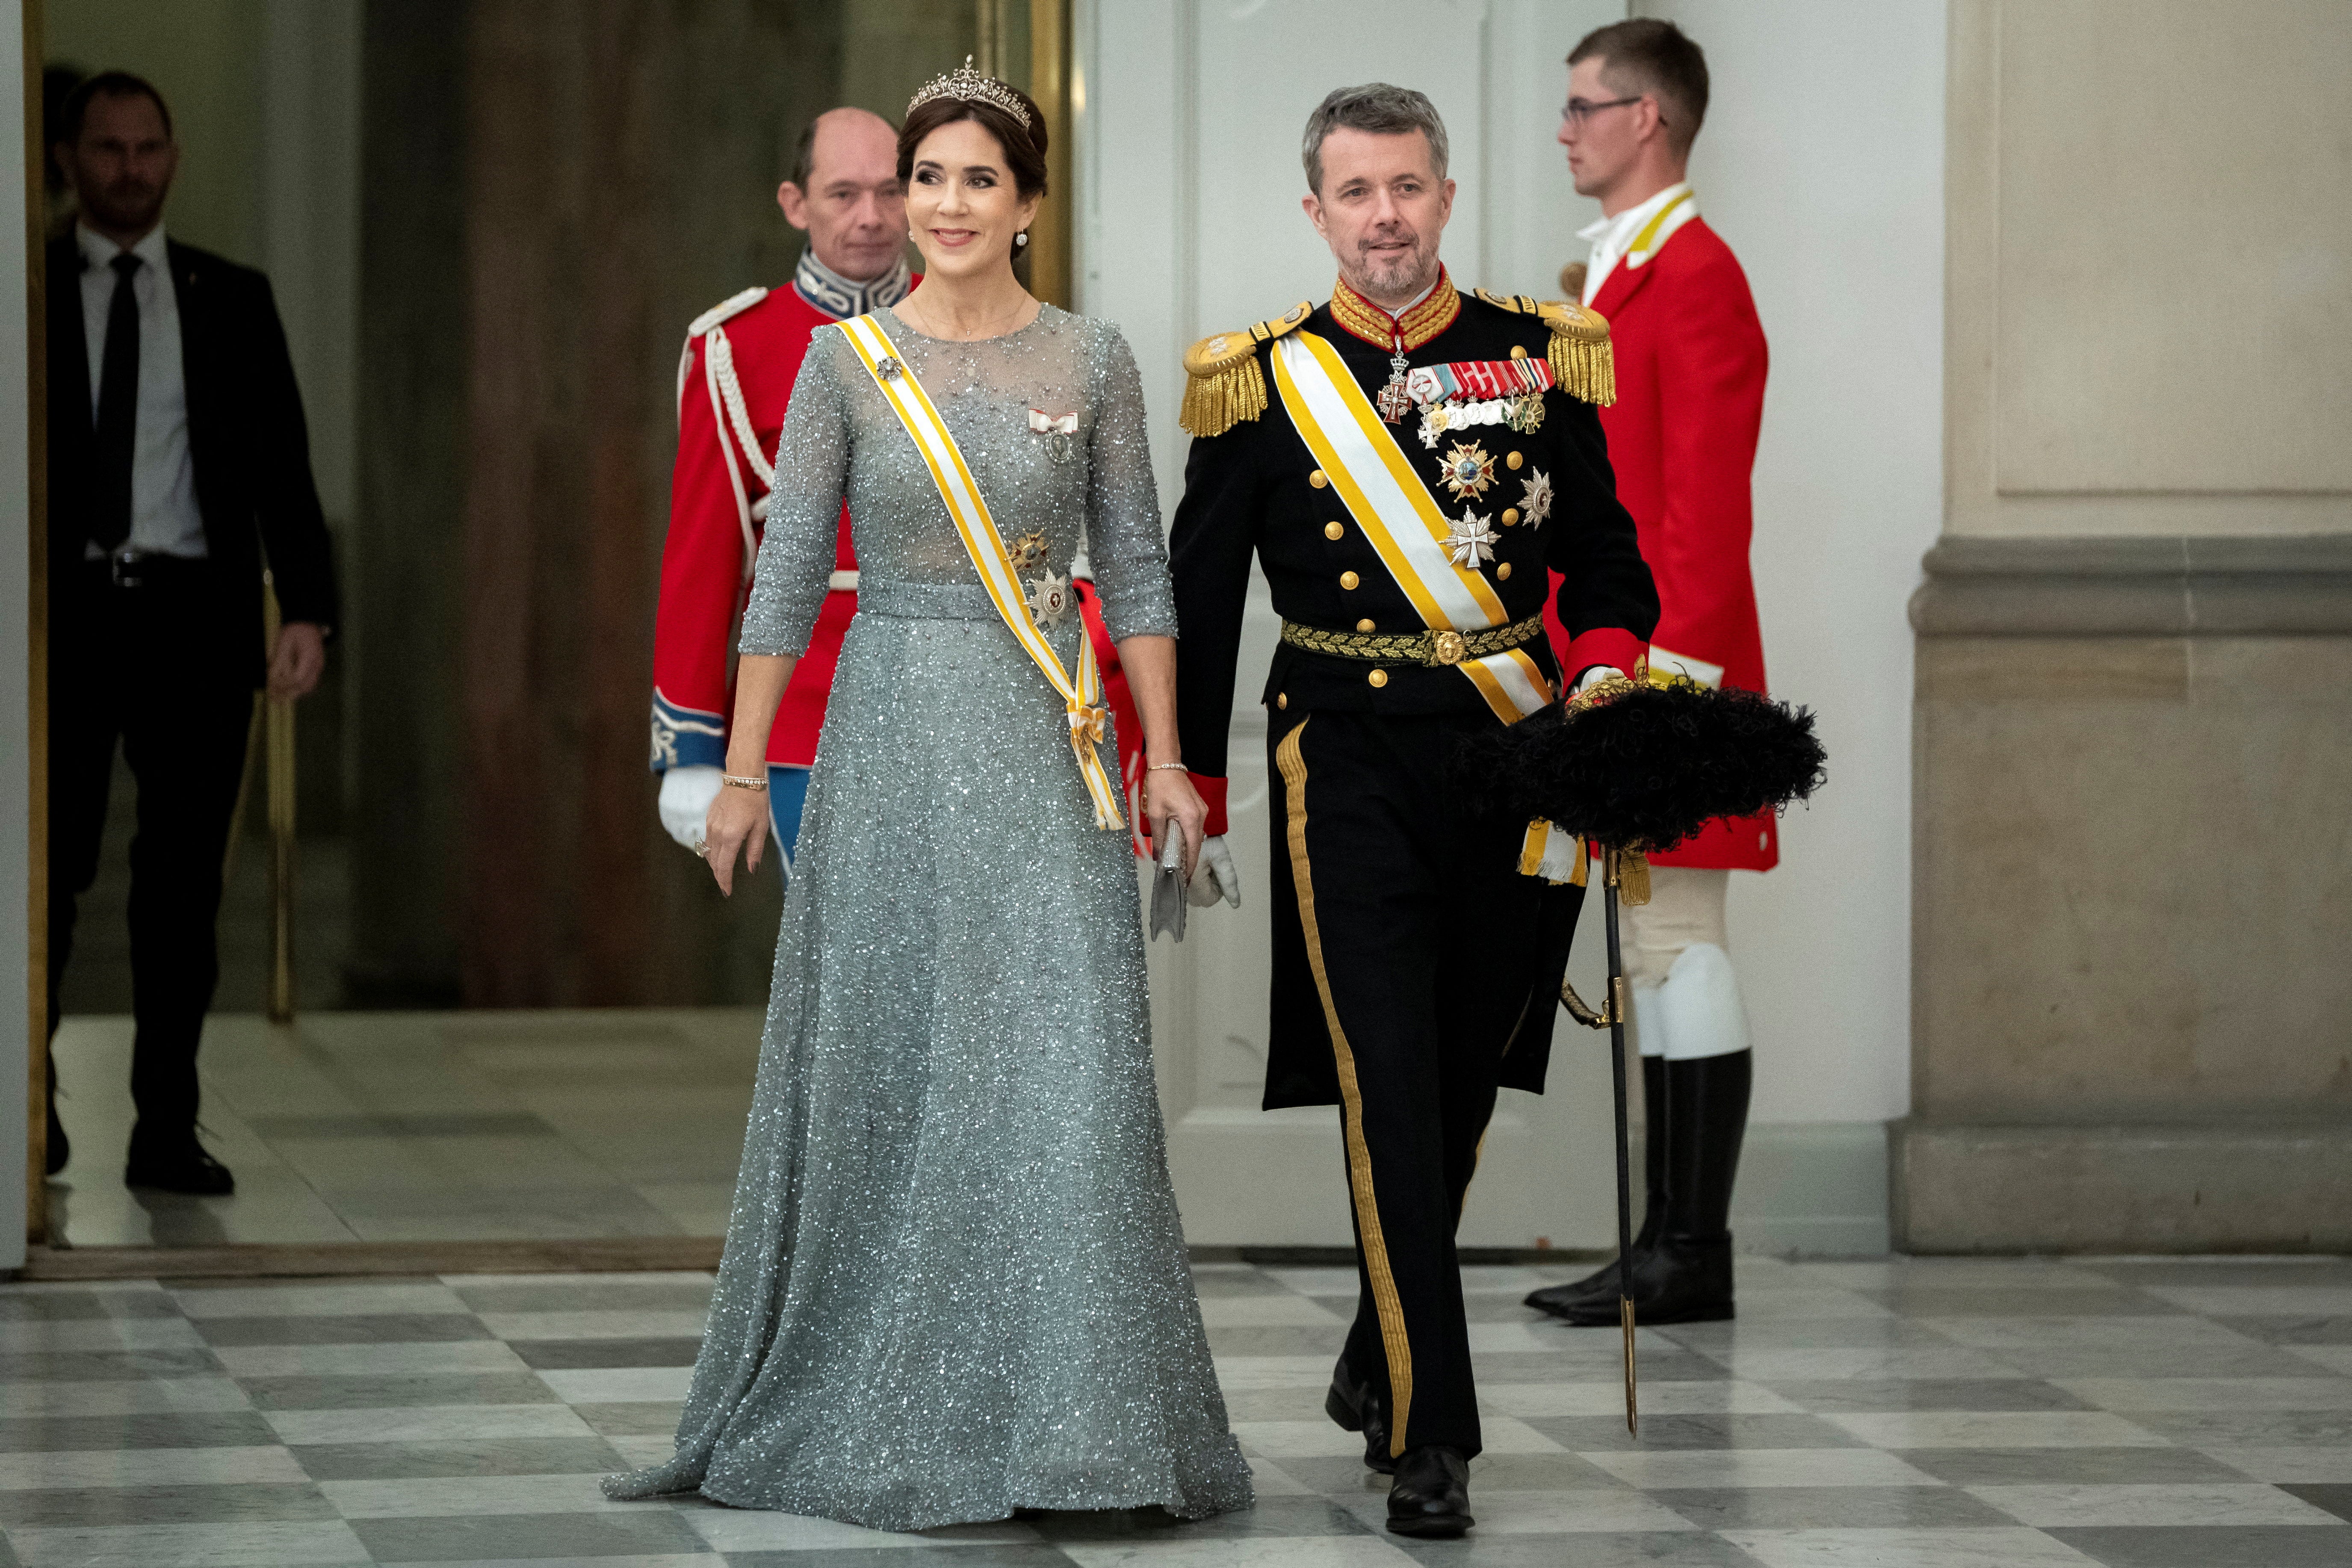 Danish Crown Princess Mary and Crown Prince Frederik arrive at the State Banquet at Christiansborg Castle in Copenhagen